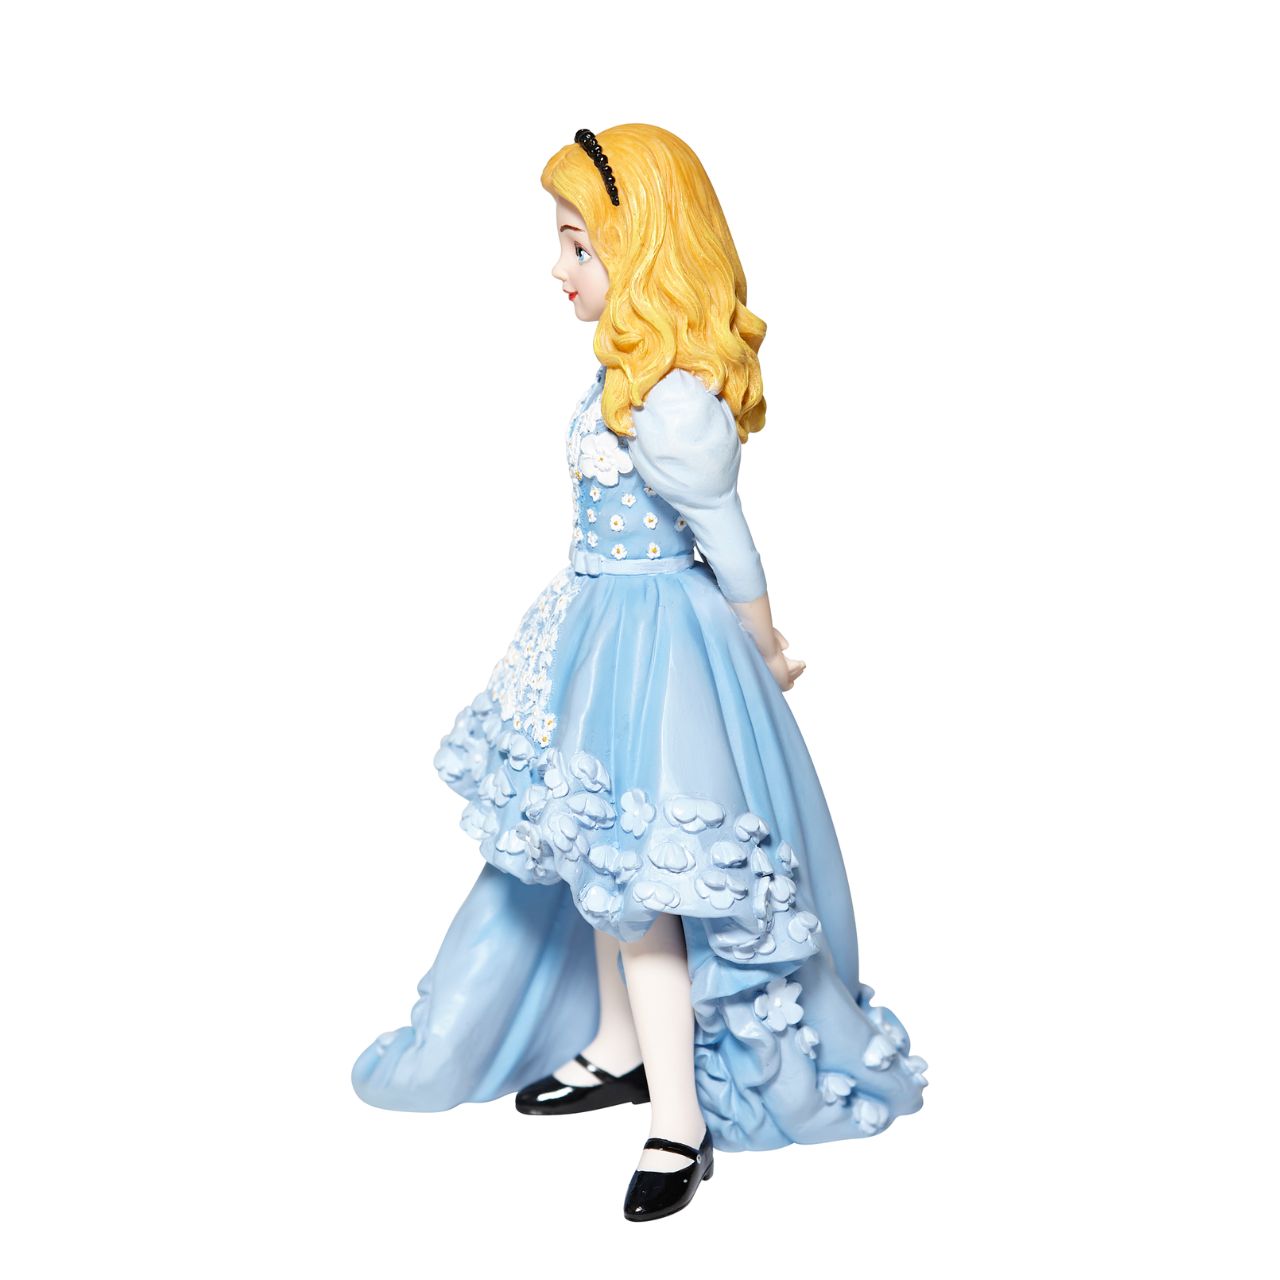 Celebrate the 70th Anniversary of Disney's animated classic film Alice in Wonderland with Alice as she's never been seen before. Part of the Disney Couture de Force Collection, Alice is the talk of Wonderland in her fashion forward tea party dress. 